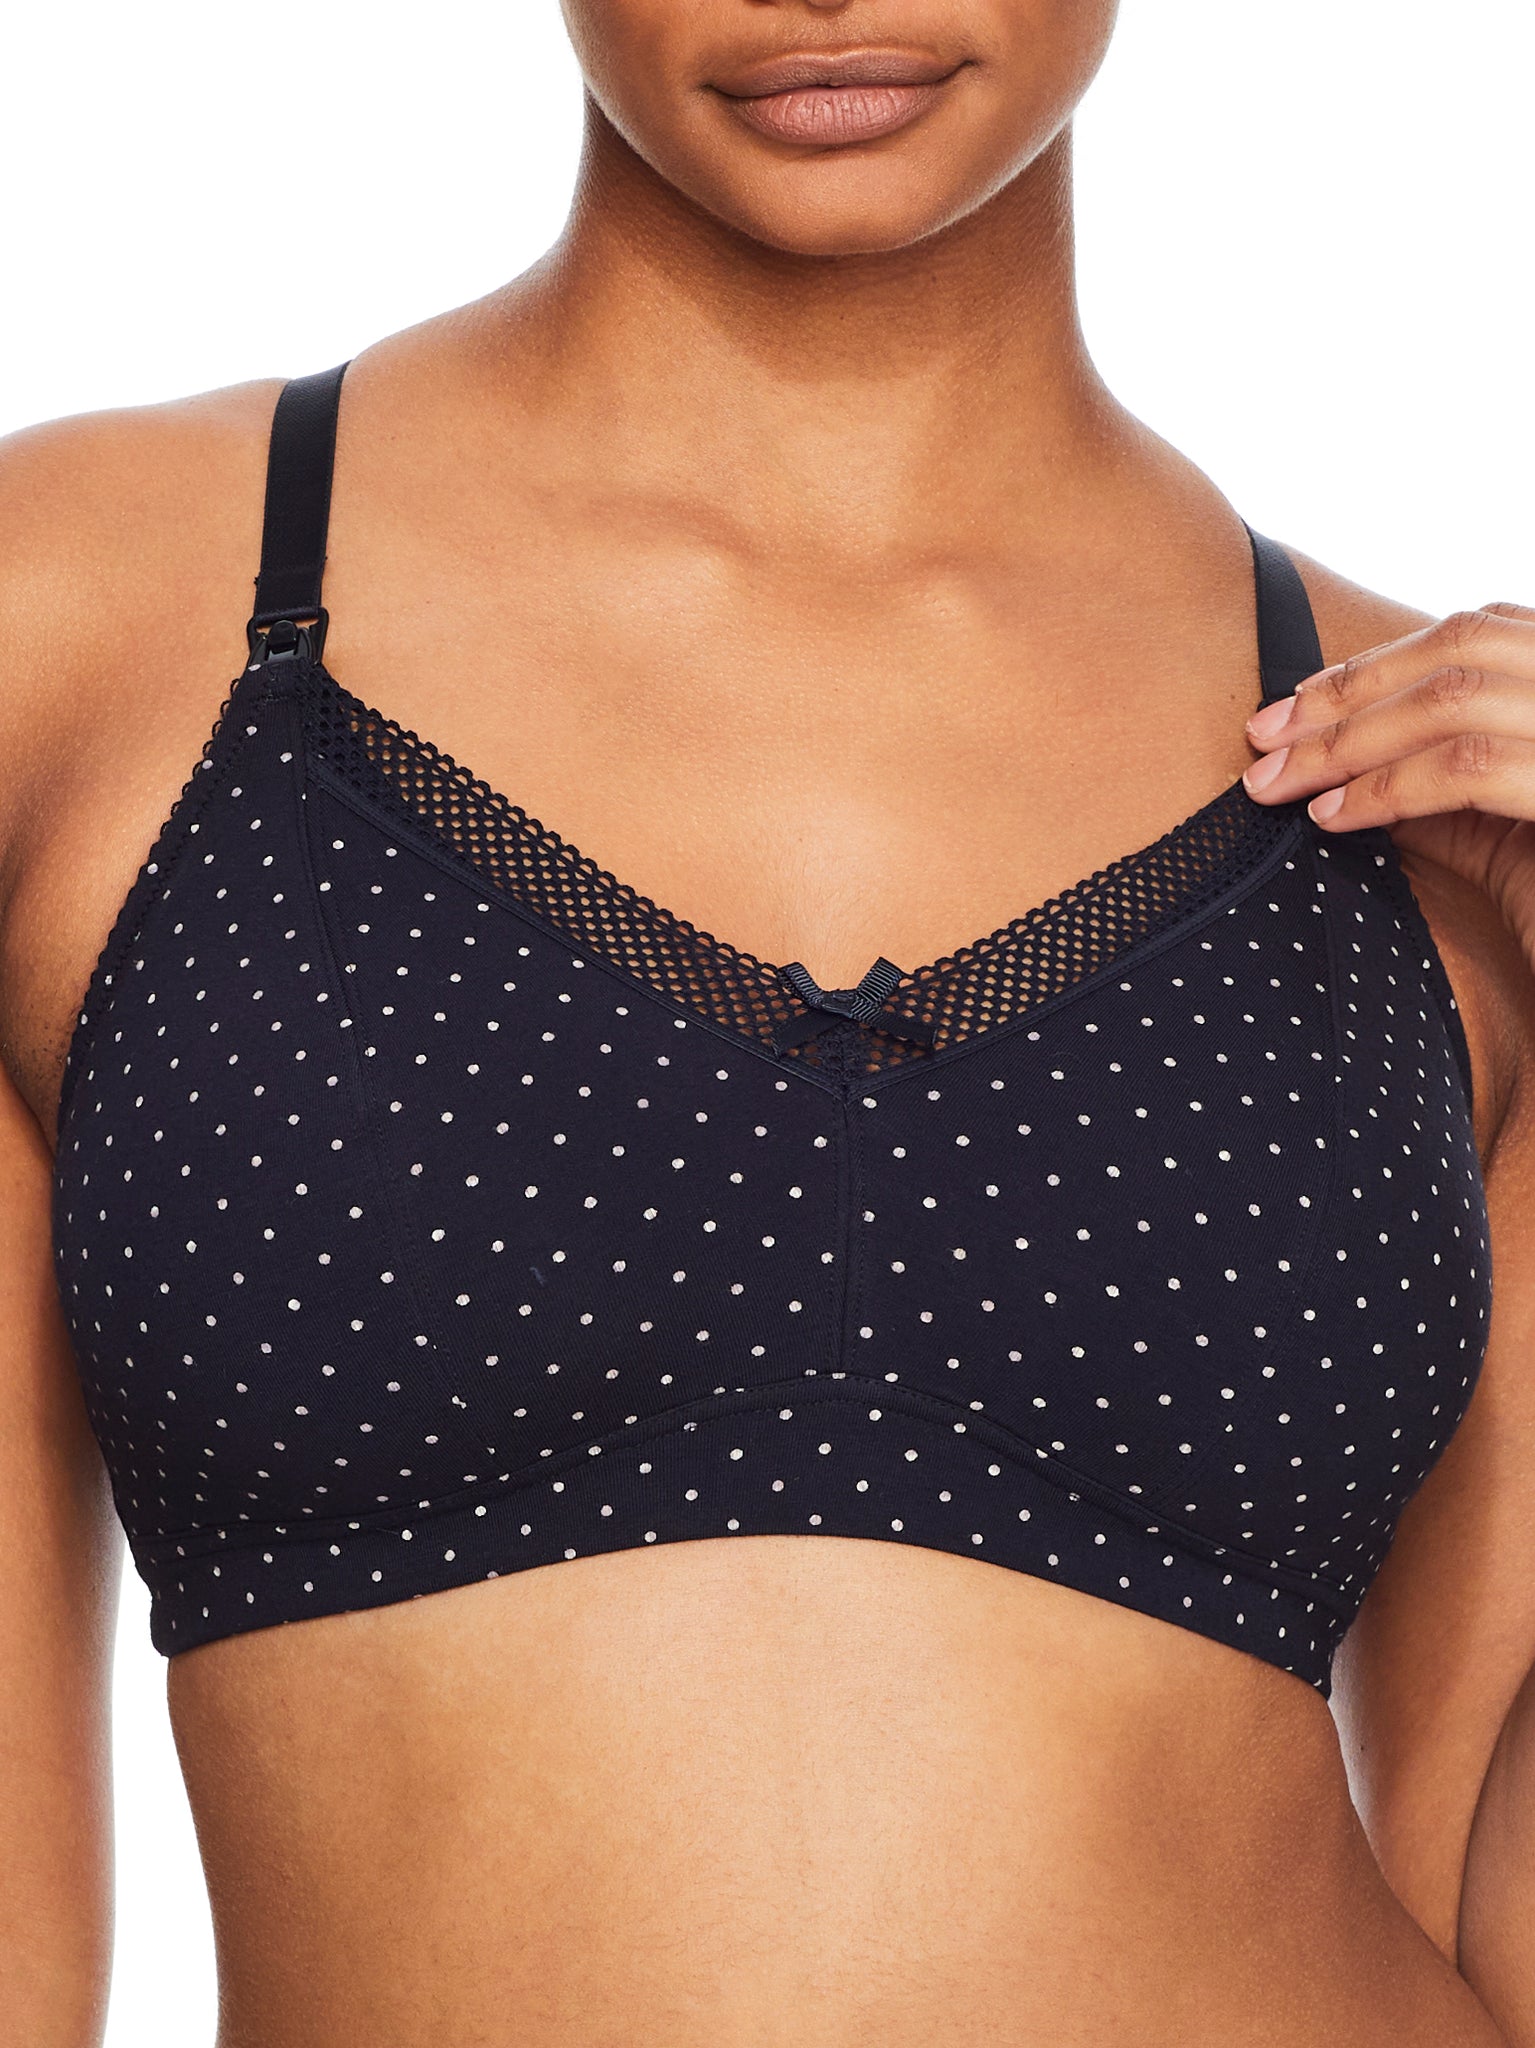 The Pencil Test - Looking for a maternity bra that is more fun and stylish,  but with functional comfort? The Love To Lounge Cotton Nursing Bra by Pour  Moi has great features!